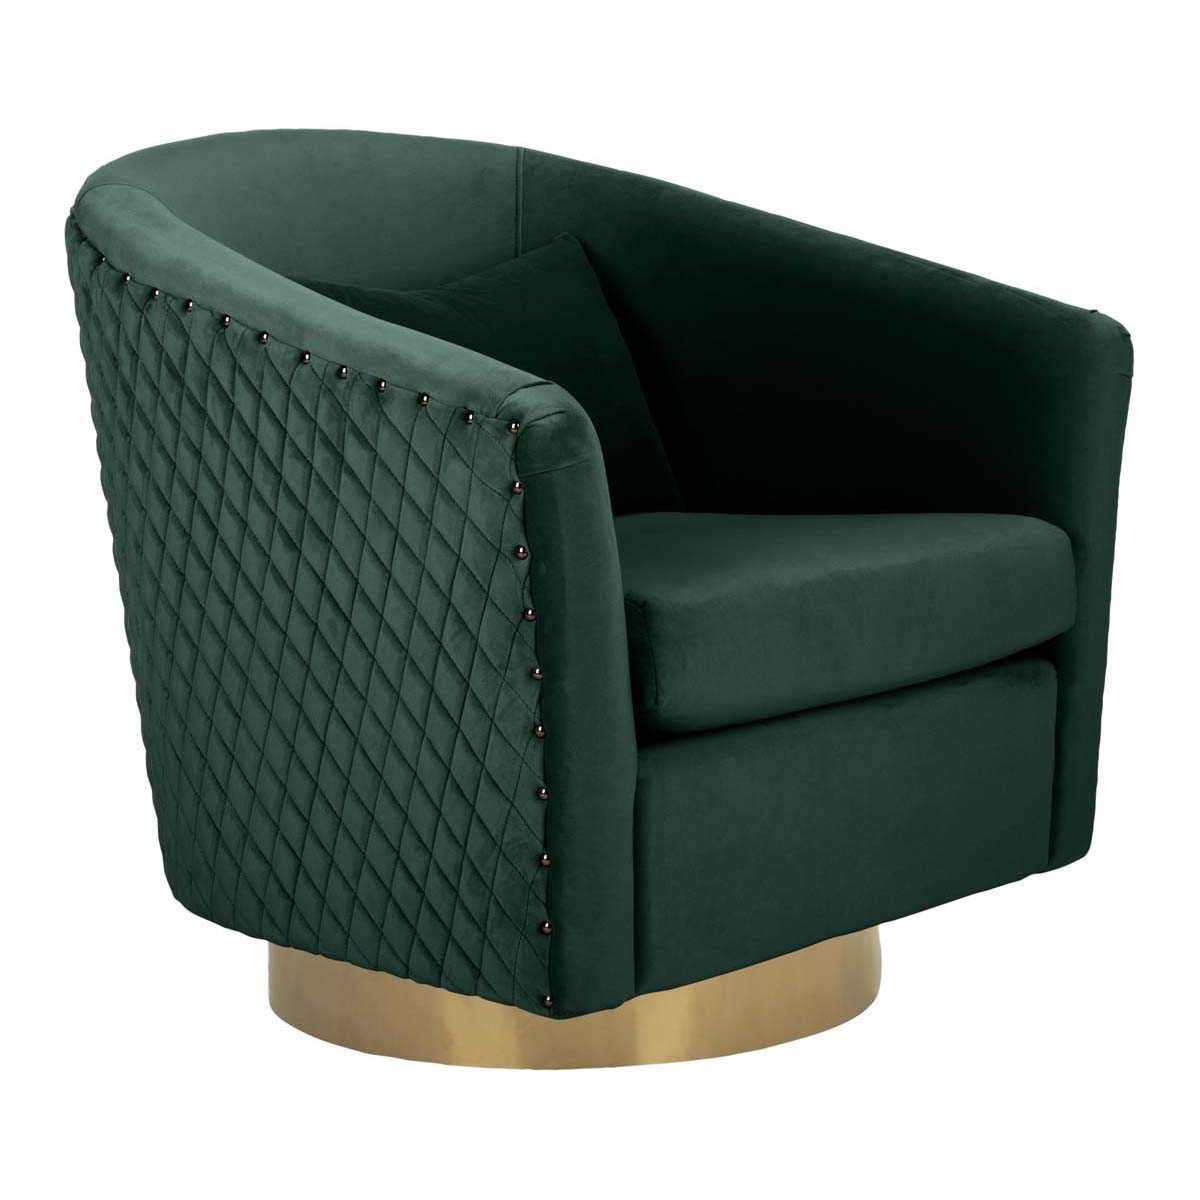 Safavieh Couture Clara Quilted Swivel Tub Chair - Emerald